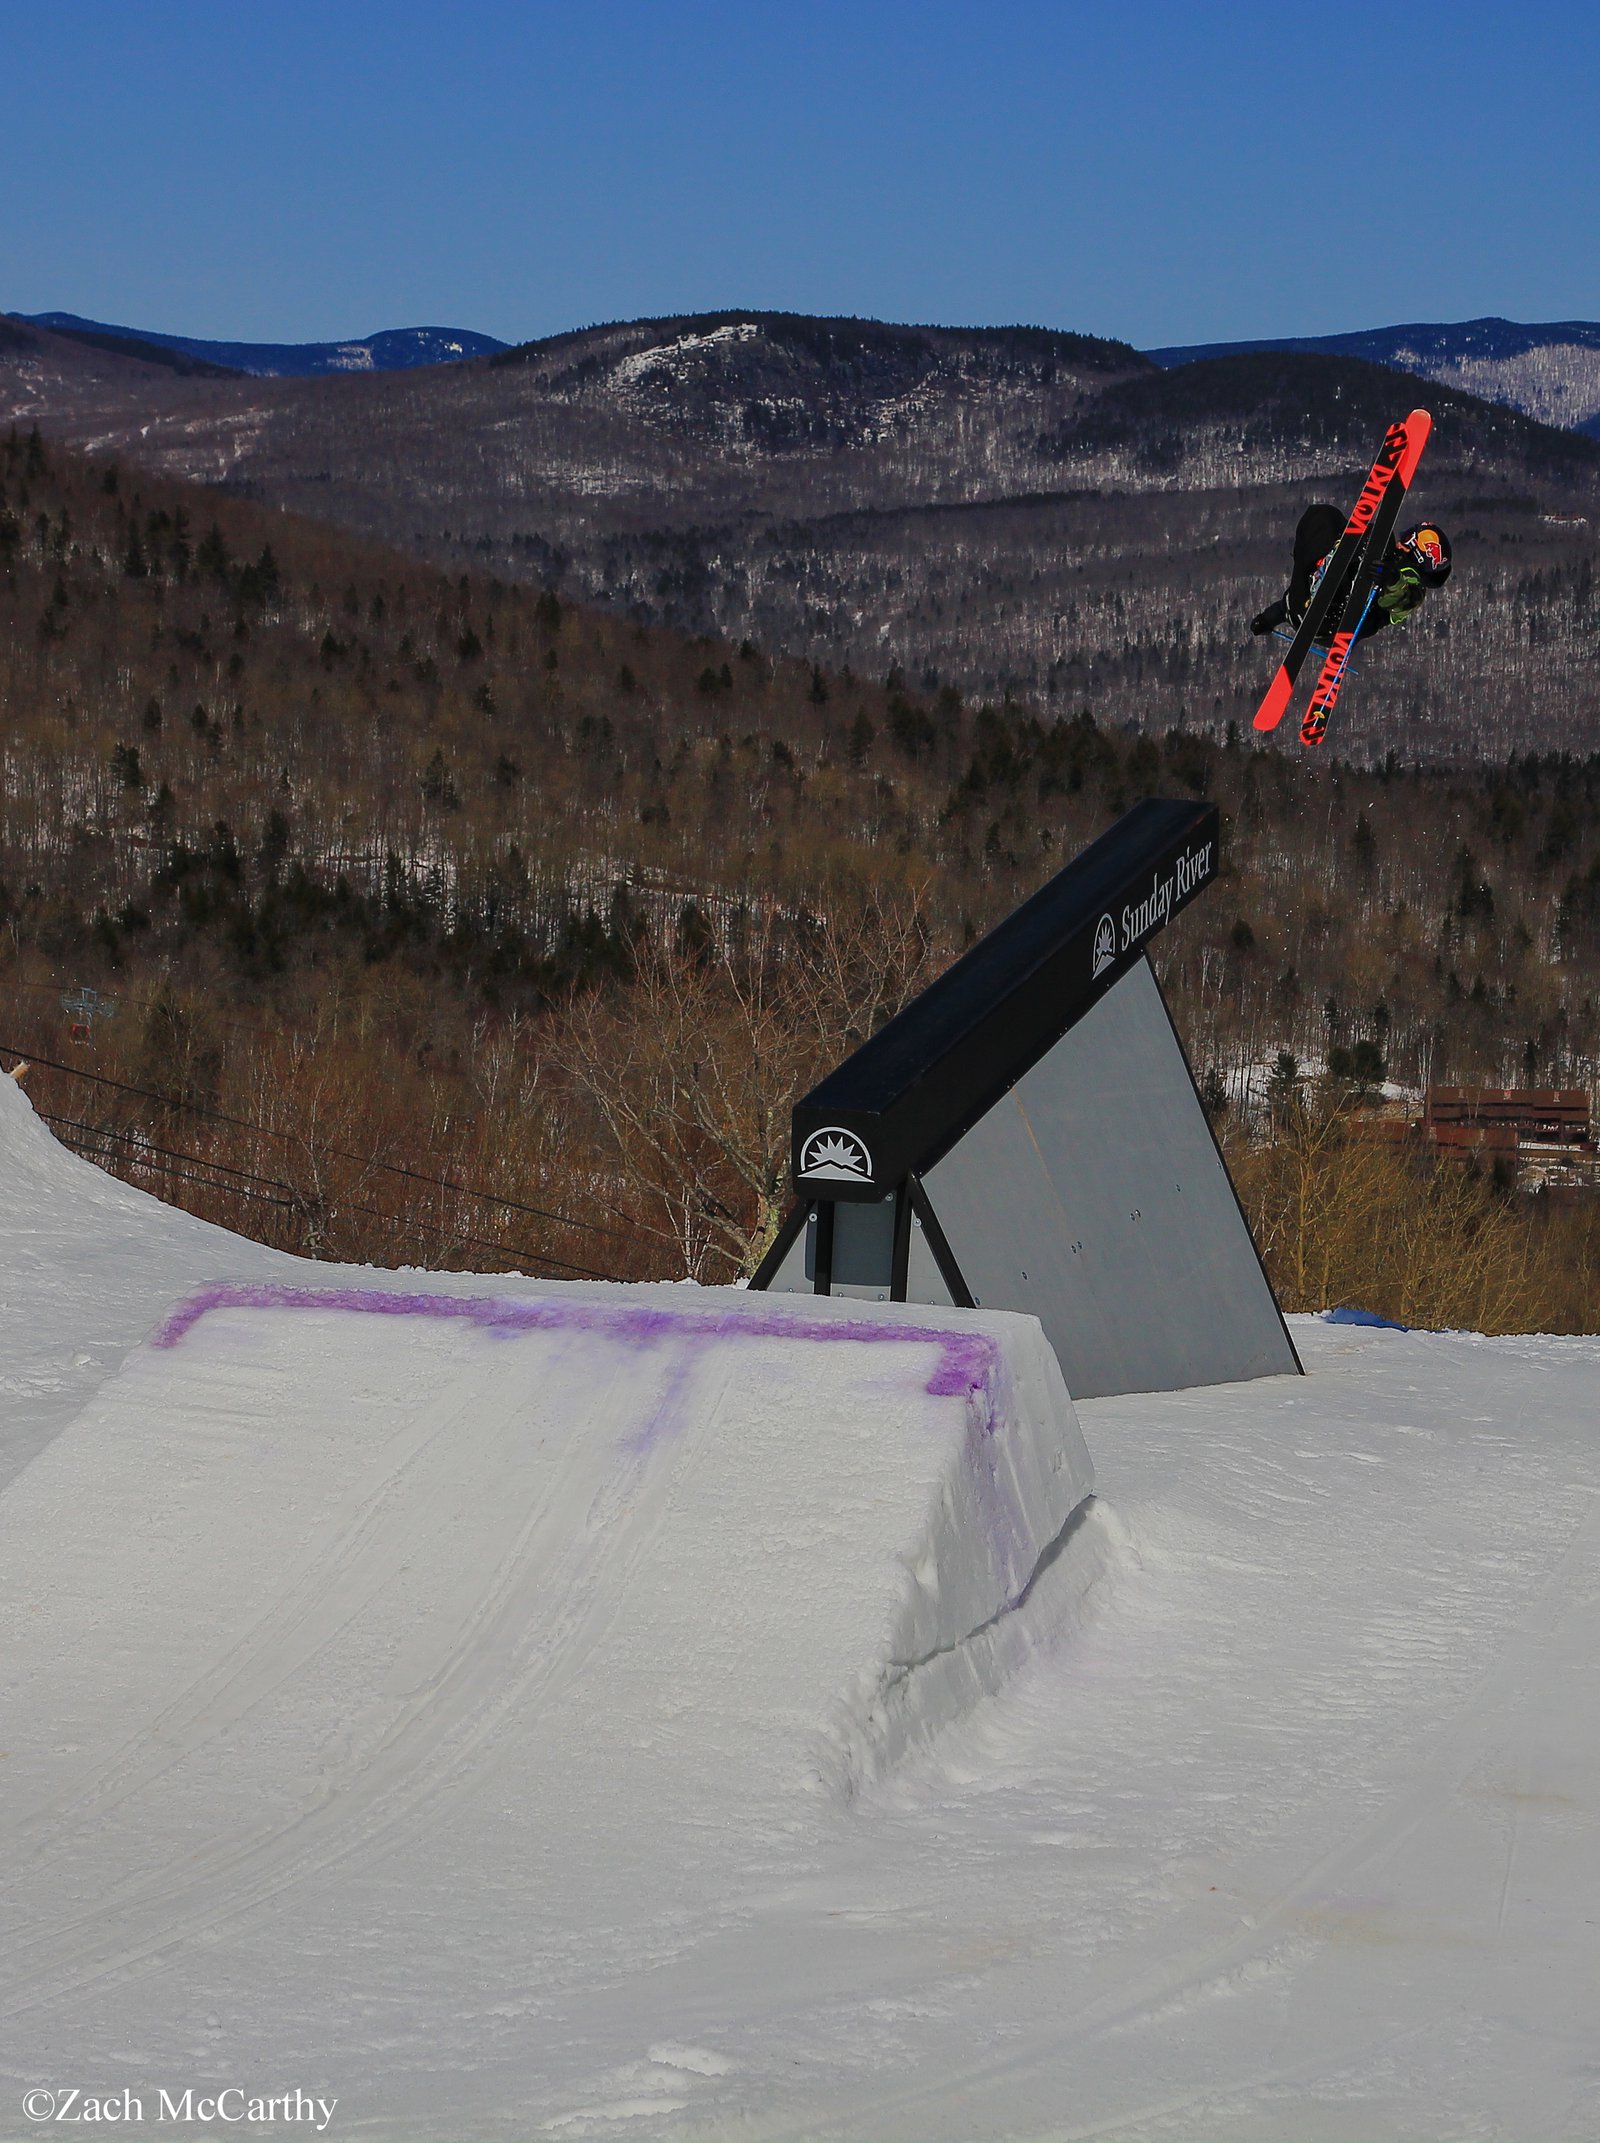 Nick Goepper Switch 270 on Misty 450 out